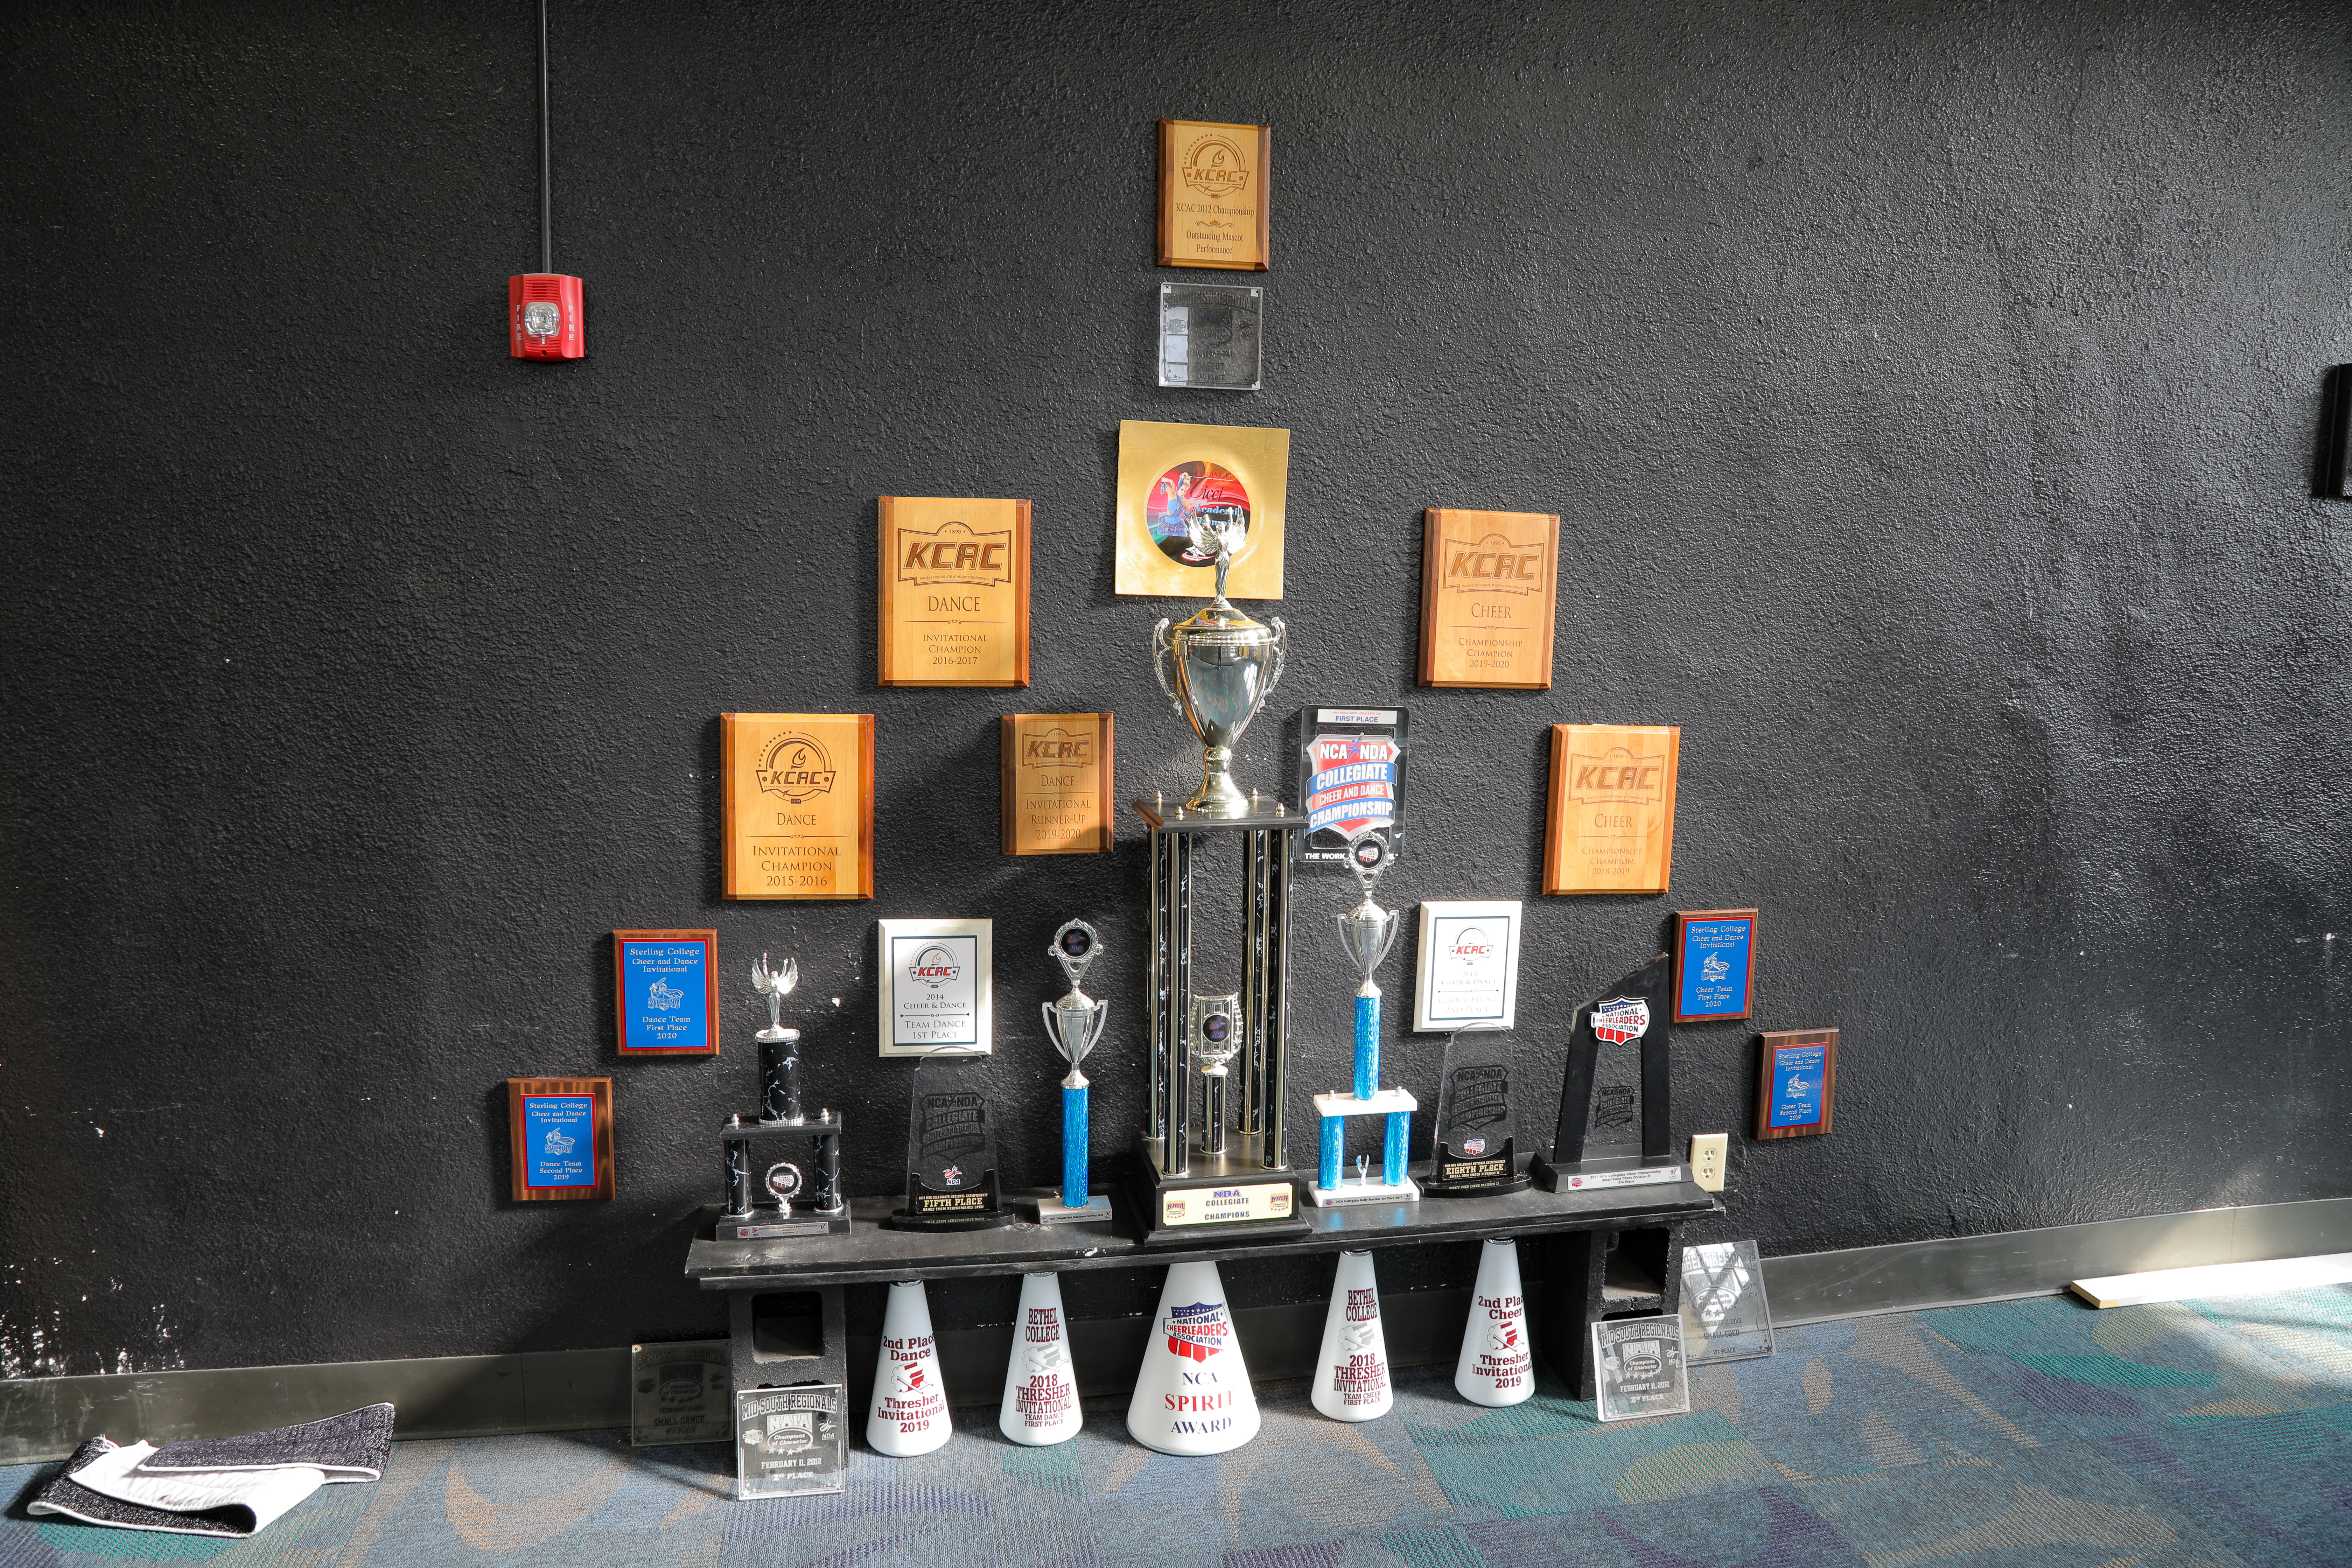 Cheer and Dance Trophy 